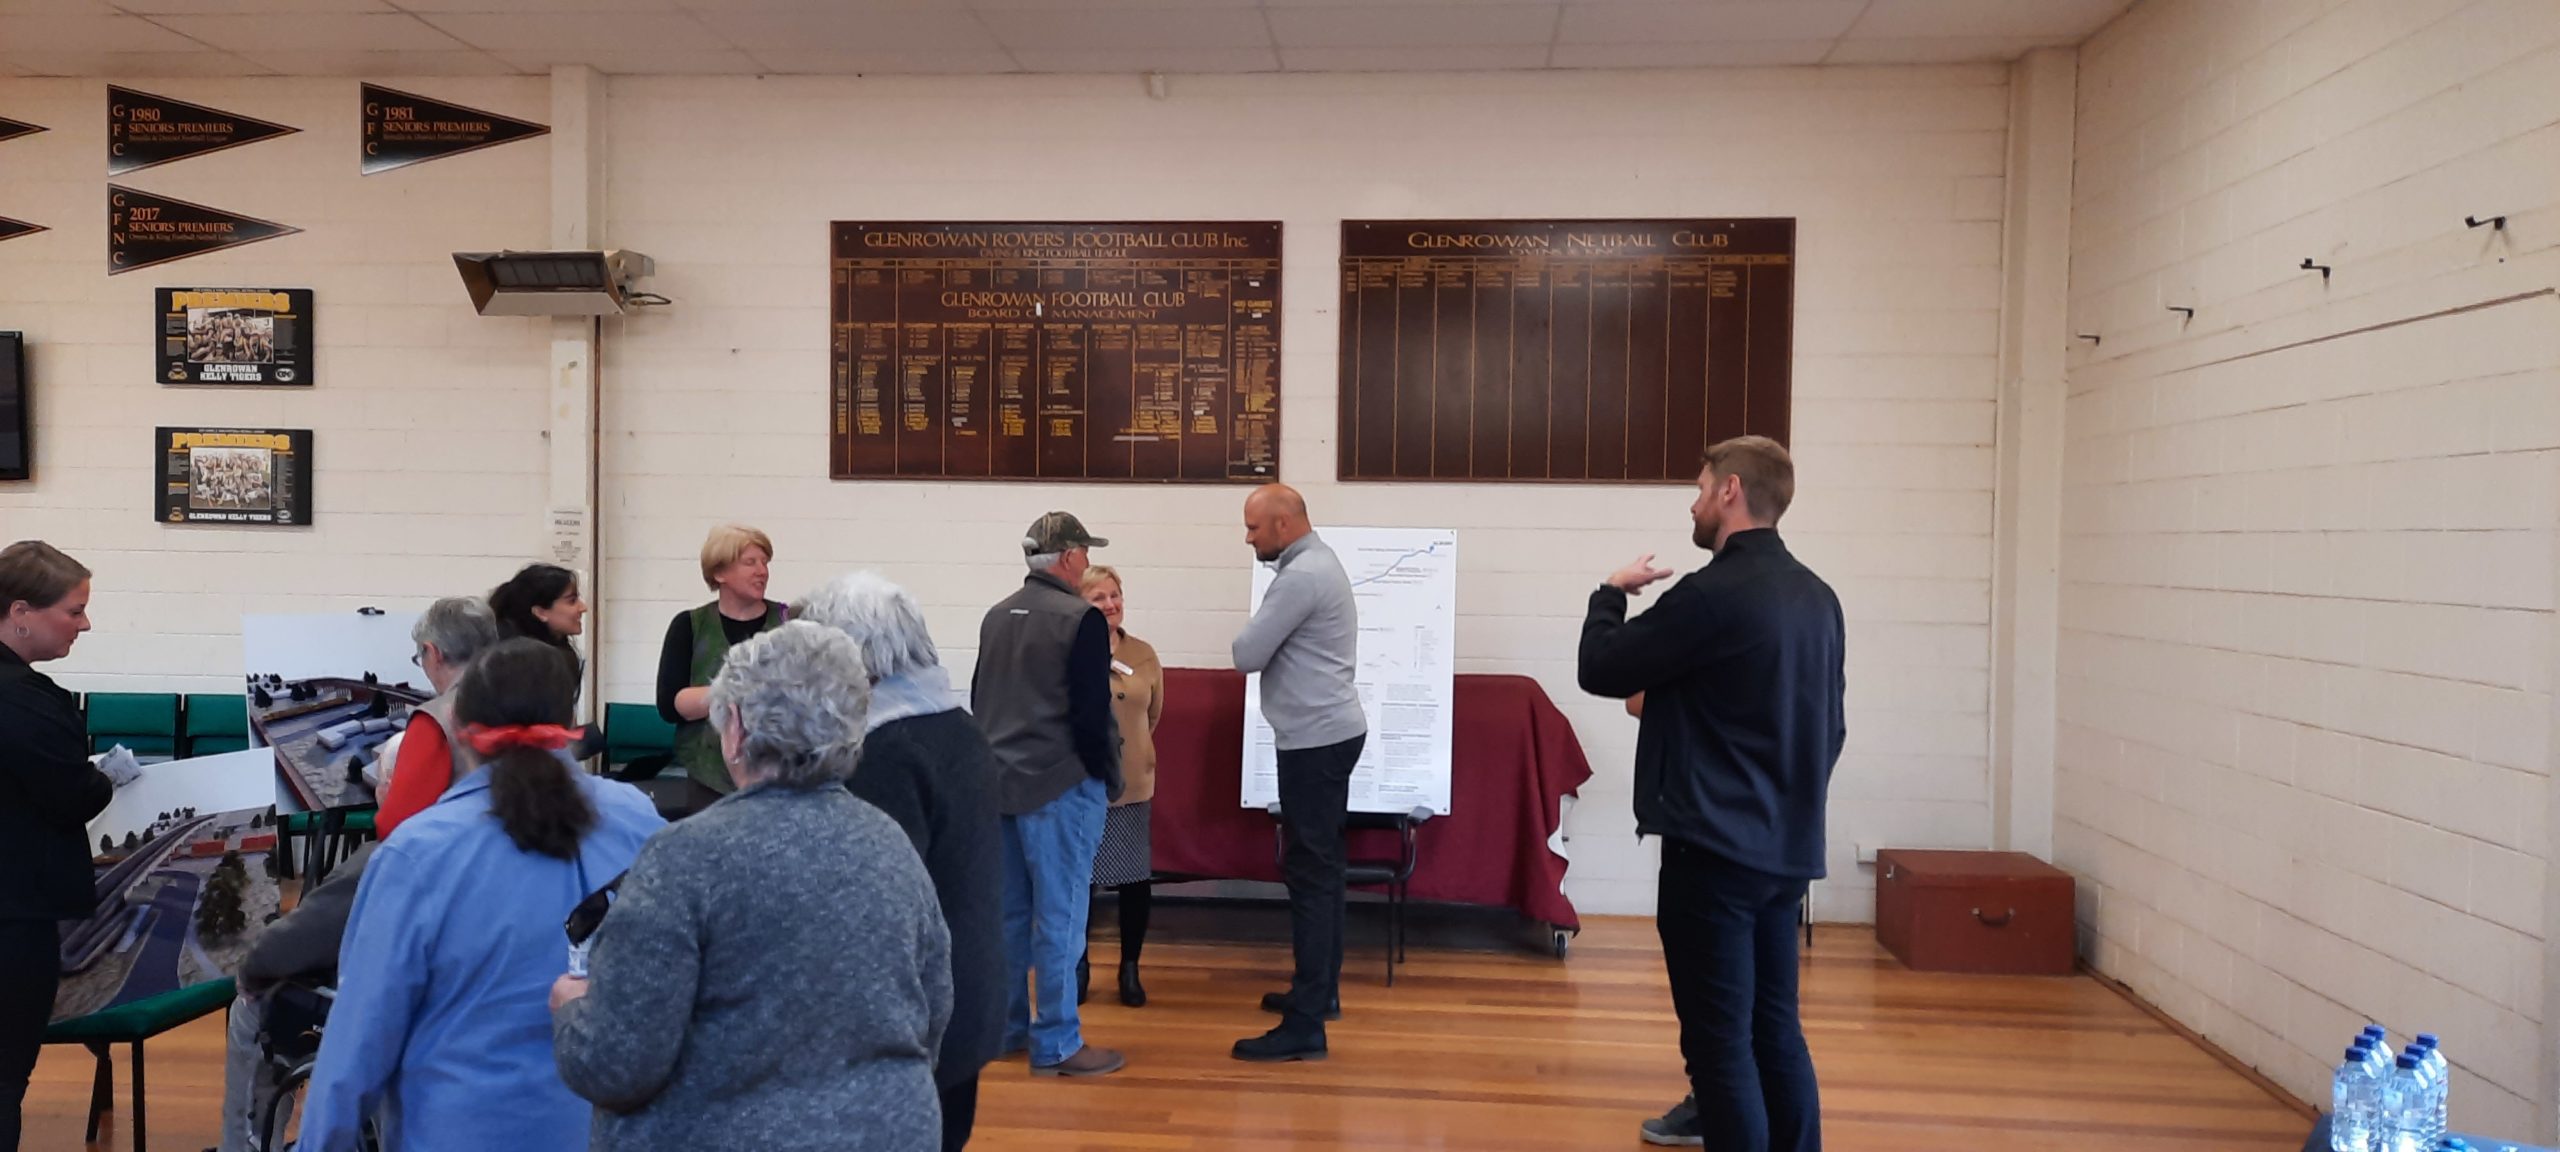 Around 40 people attended the session to see proposed bridge designs for Glenrowan's Beaconsfield Parade.